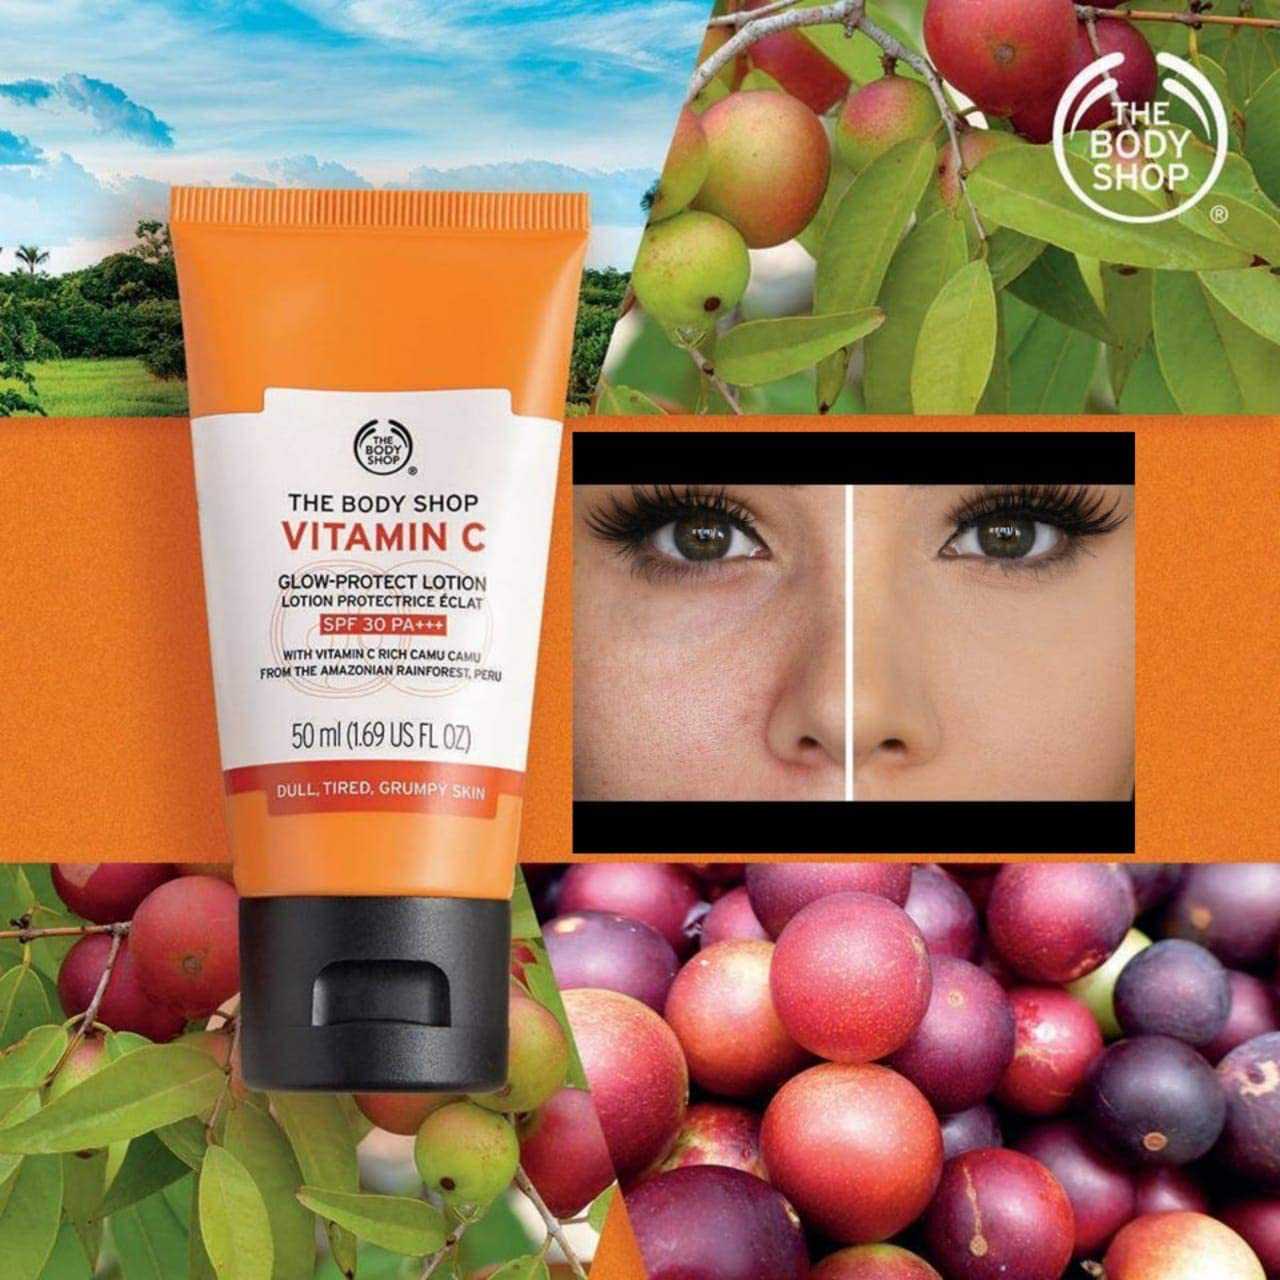 The Body Shop Vitamin C Glow-Protect Lotion SPF30PA+++